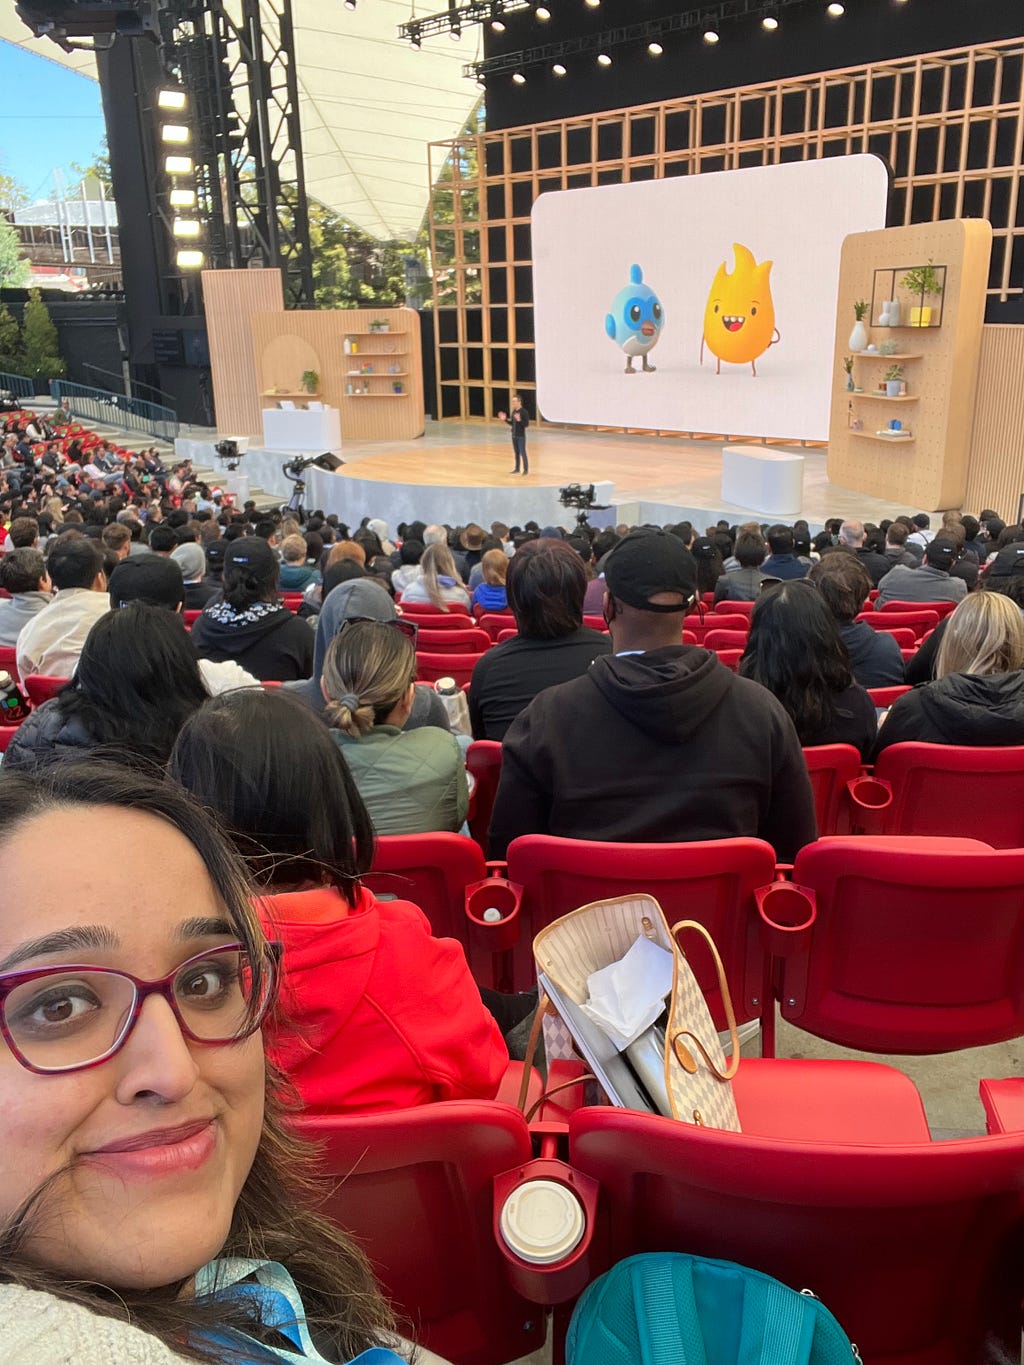 A selfie of me with the stage screen displaying Flutter and Firebase mascots